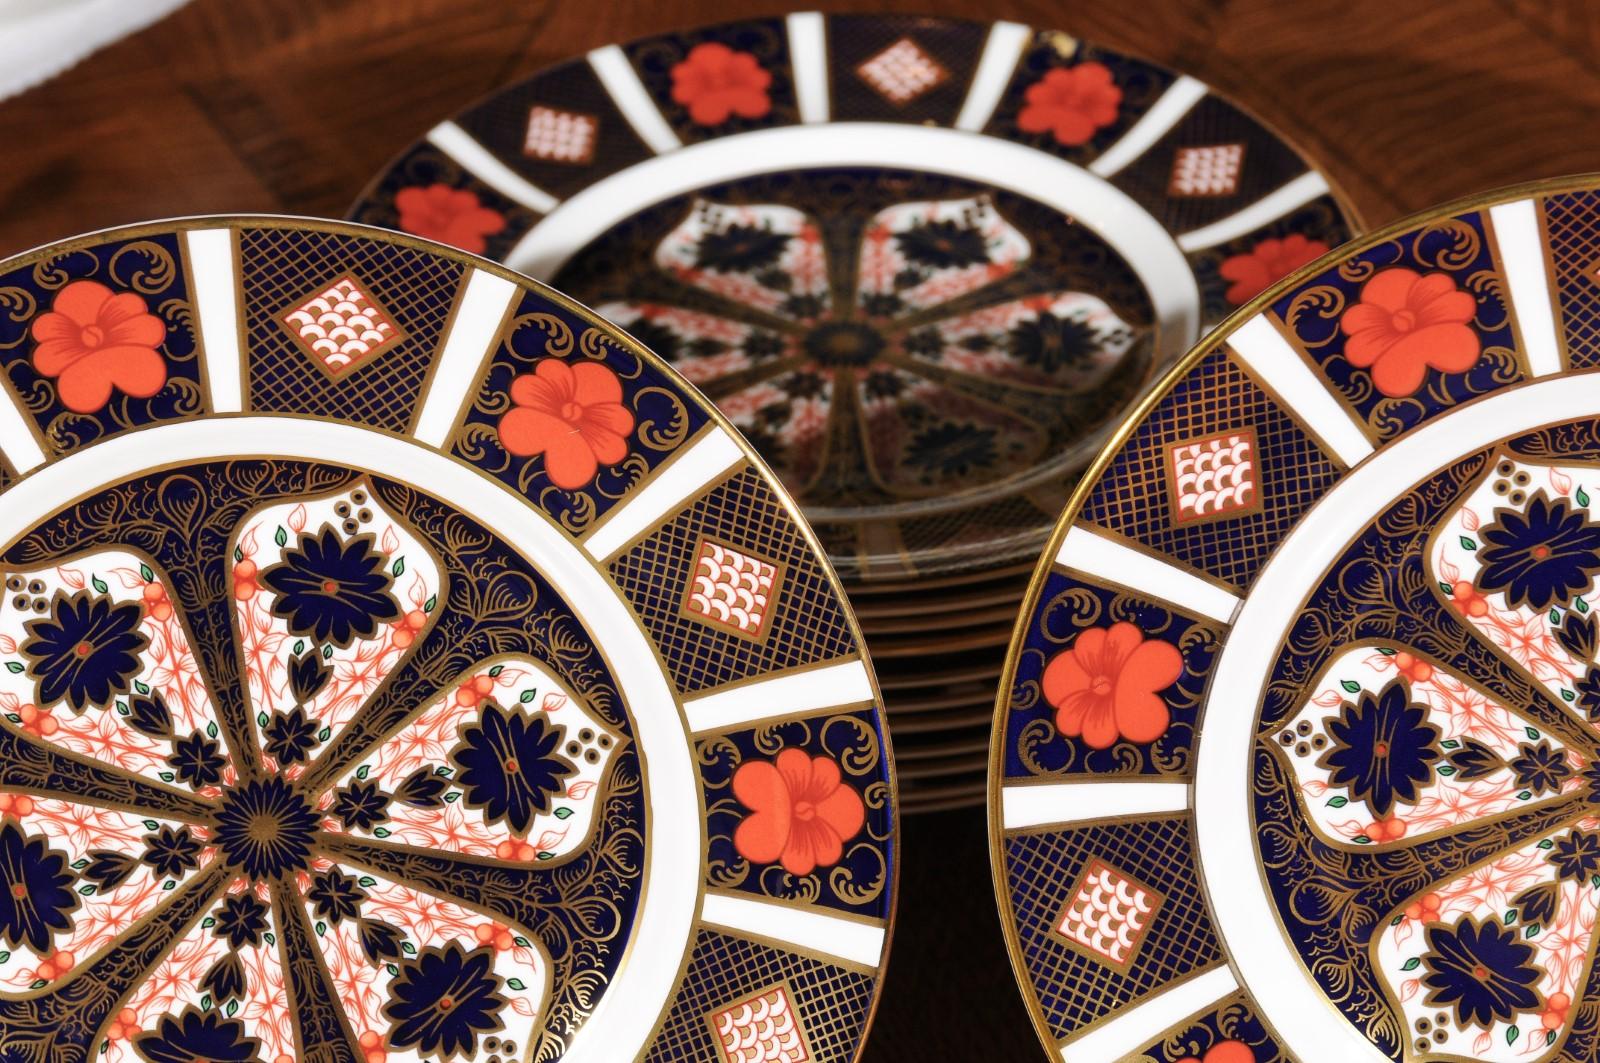 Set of 24 English Royal Crown Derby Porcelain Plates with Old Imari Patterns For Sale 1